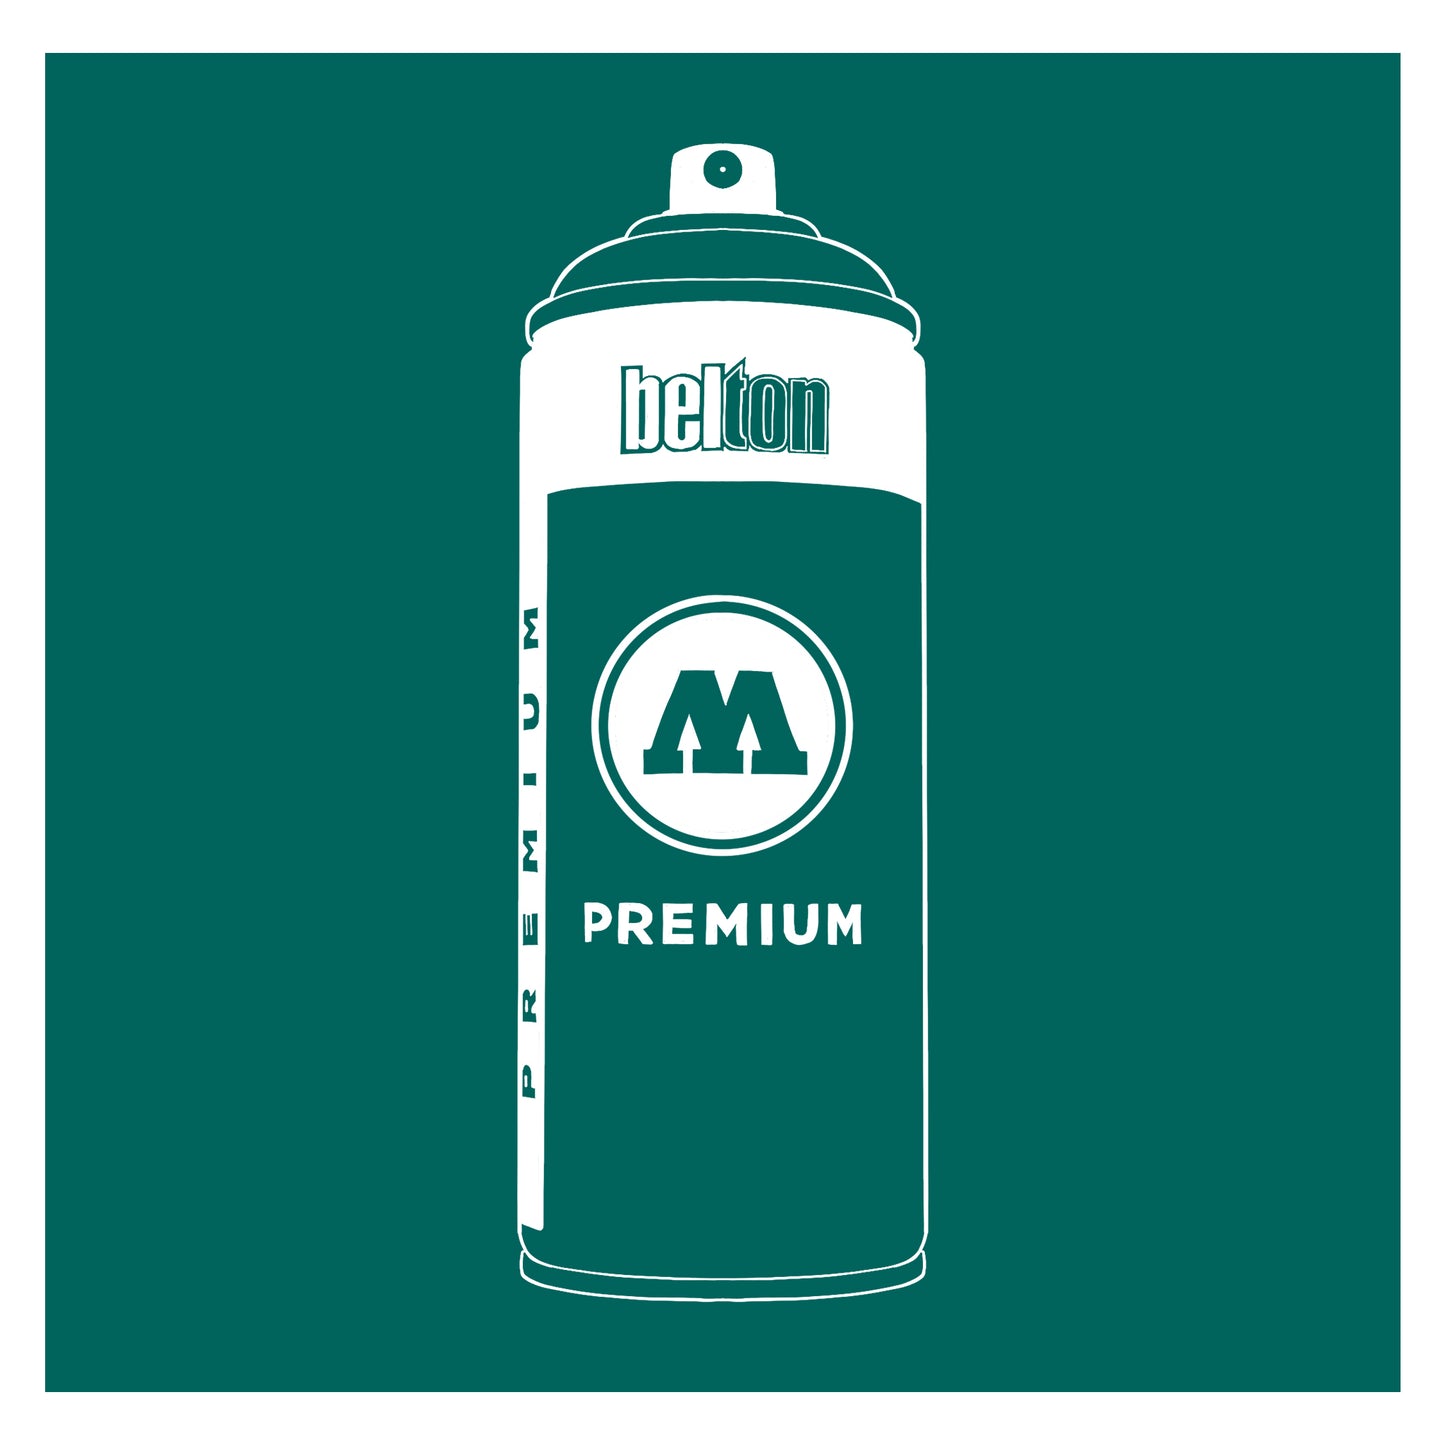 A white outline drawing of a dark teal spray paint can with the words "belton","premium" and the letter"M" written on the face in black and white font. The background is a color swatch of the same dark teal with a white border